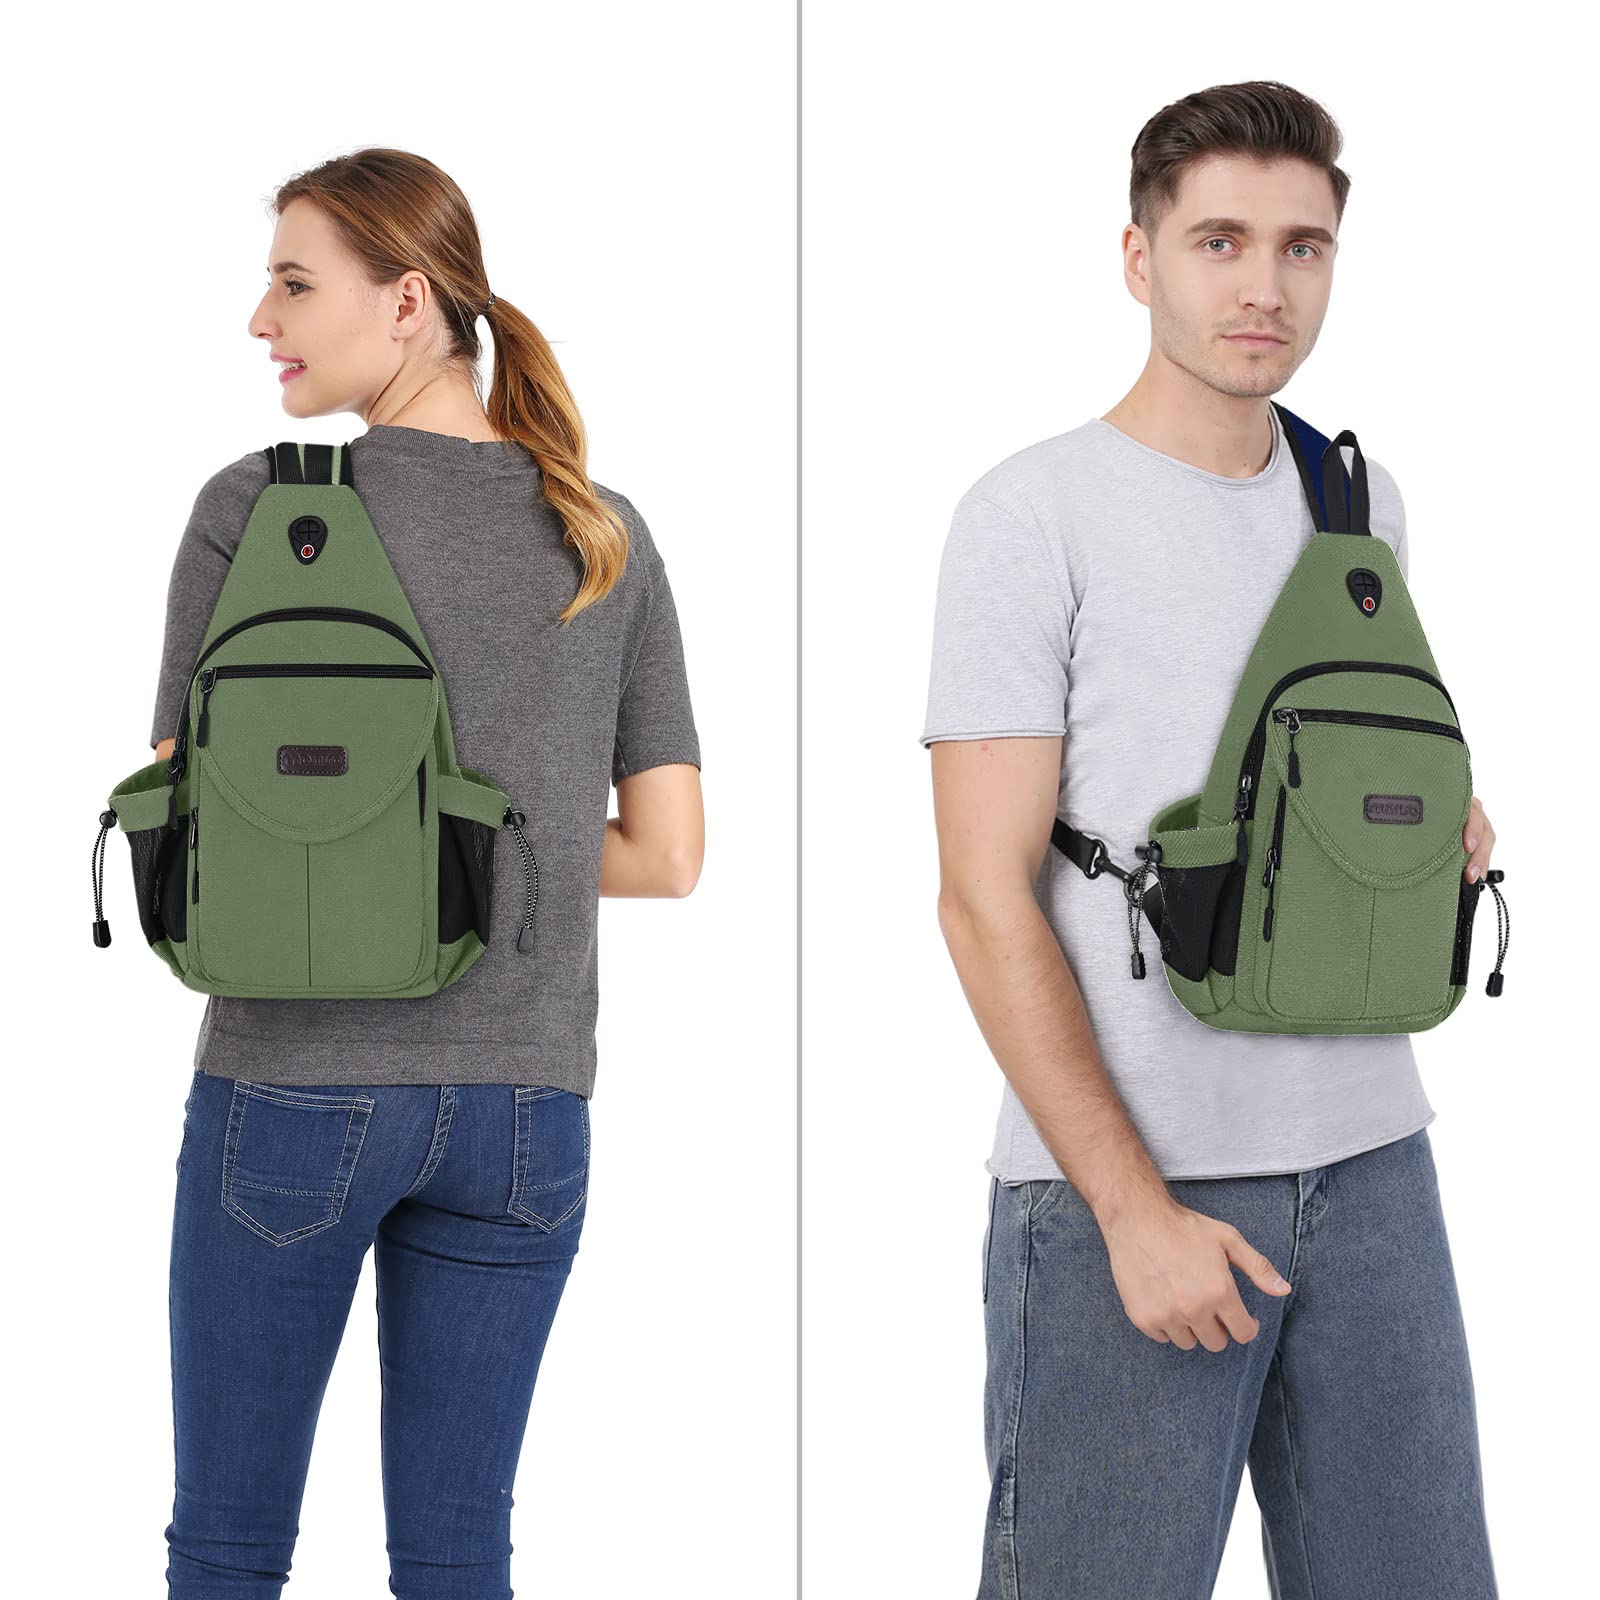 MOSISO Sling Backpack,Canvas Crossbody Hiking Daypack Bag with Anti-theft Pocket